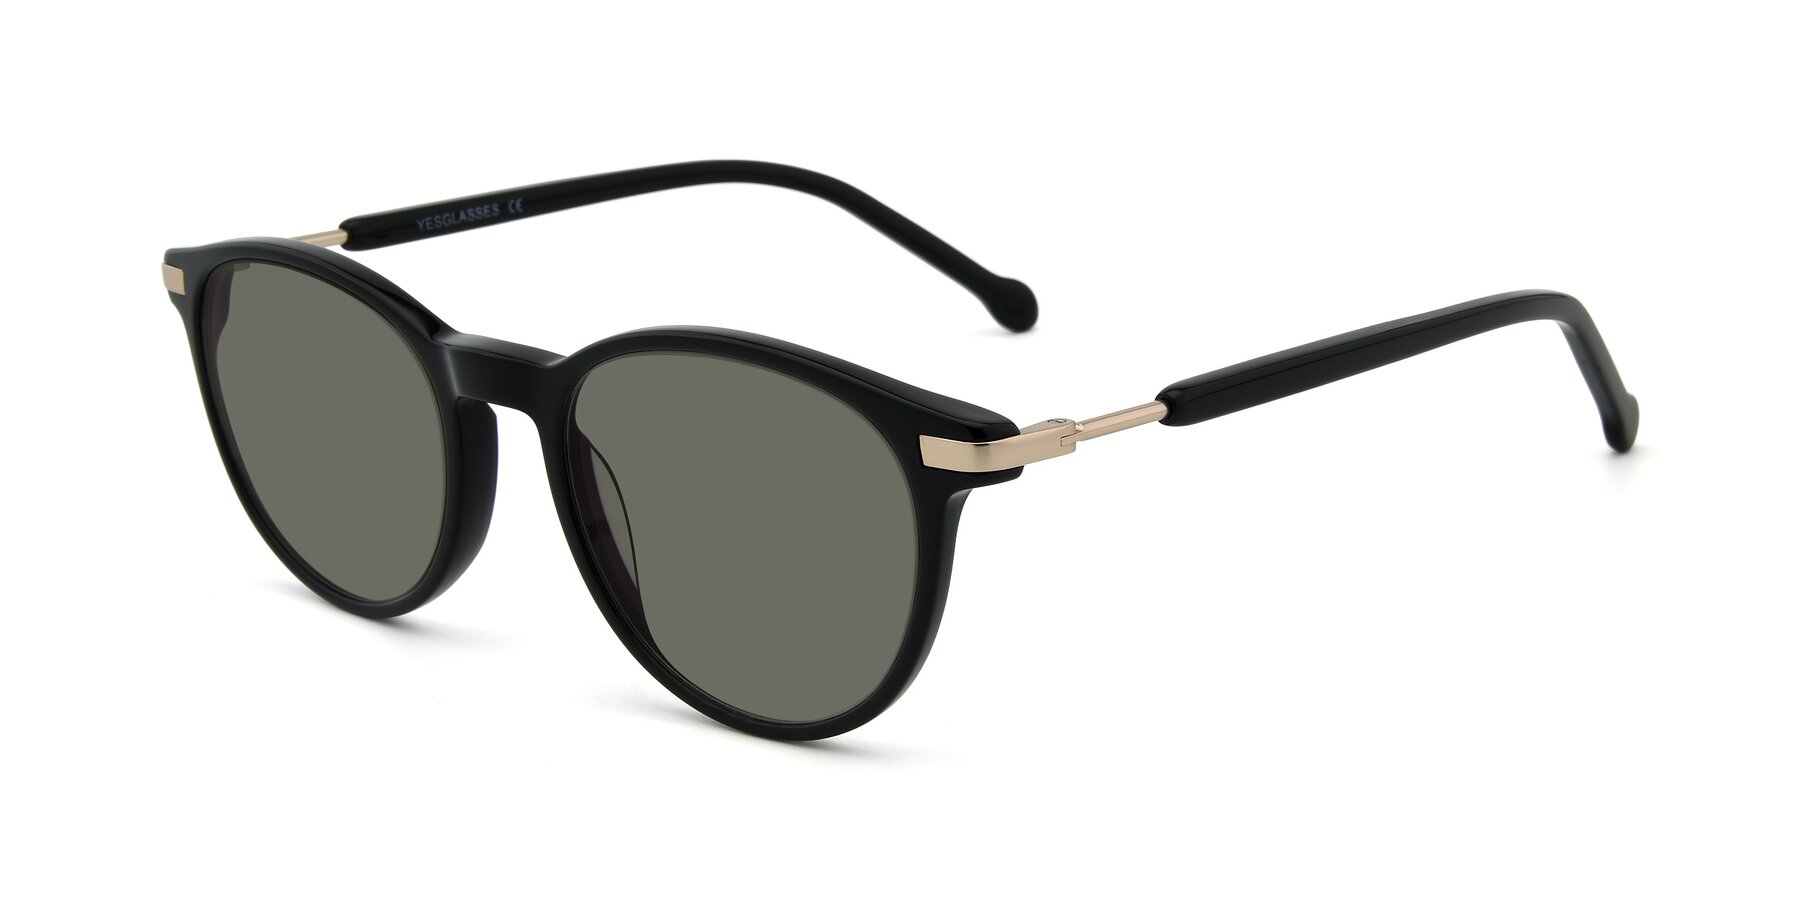 Angle of 17429 in Black with Gray Polarized Lenses